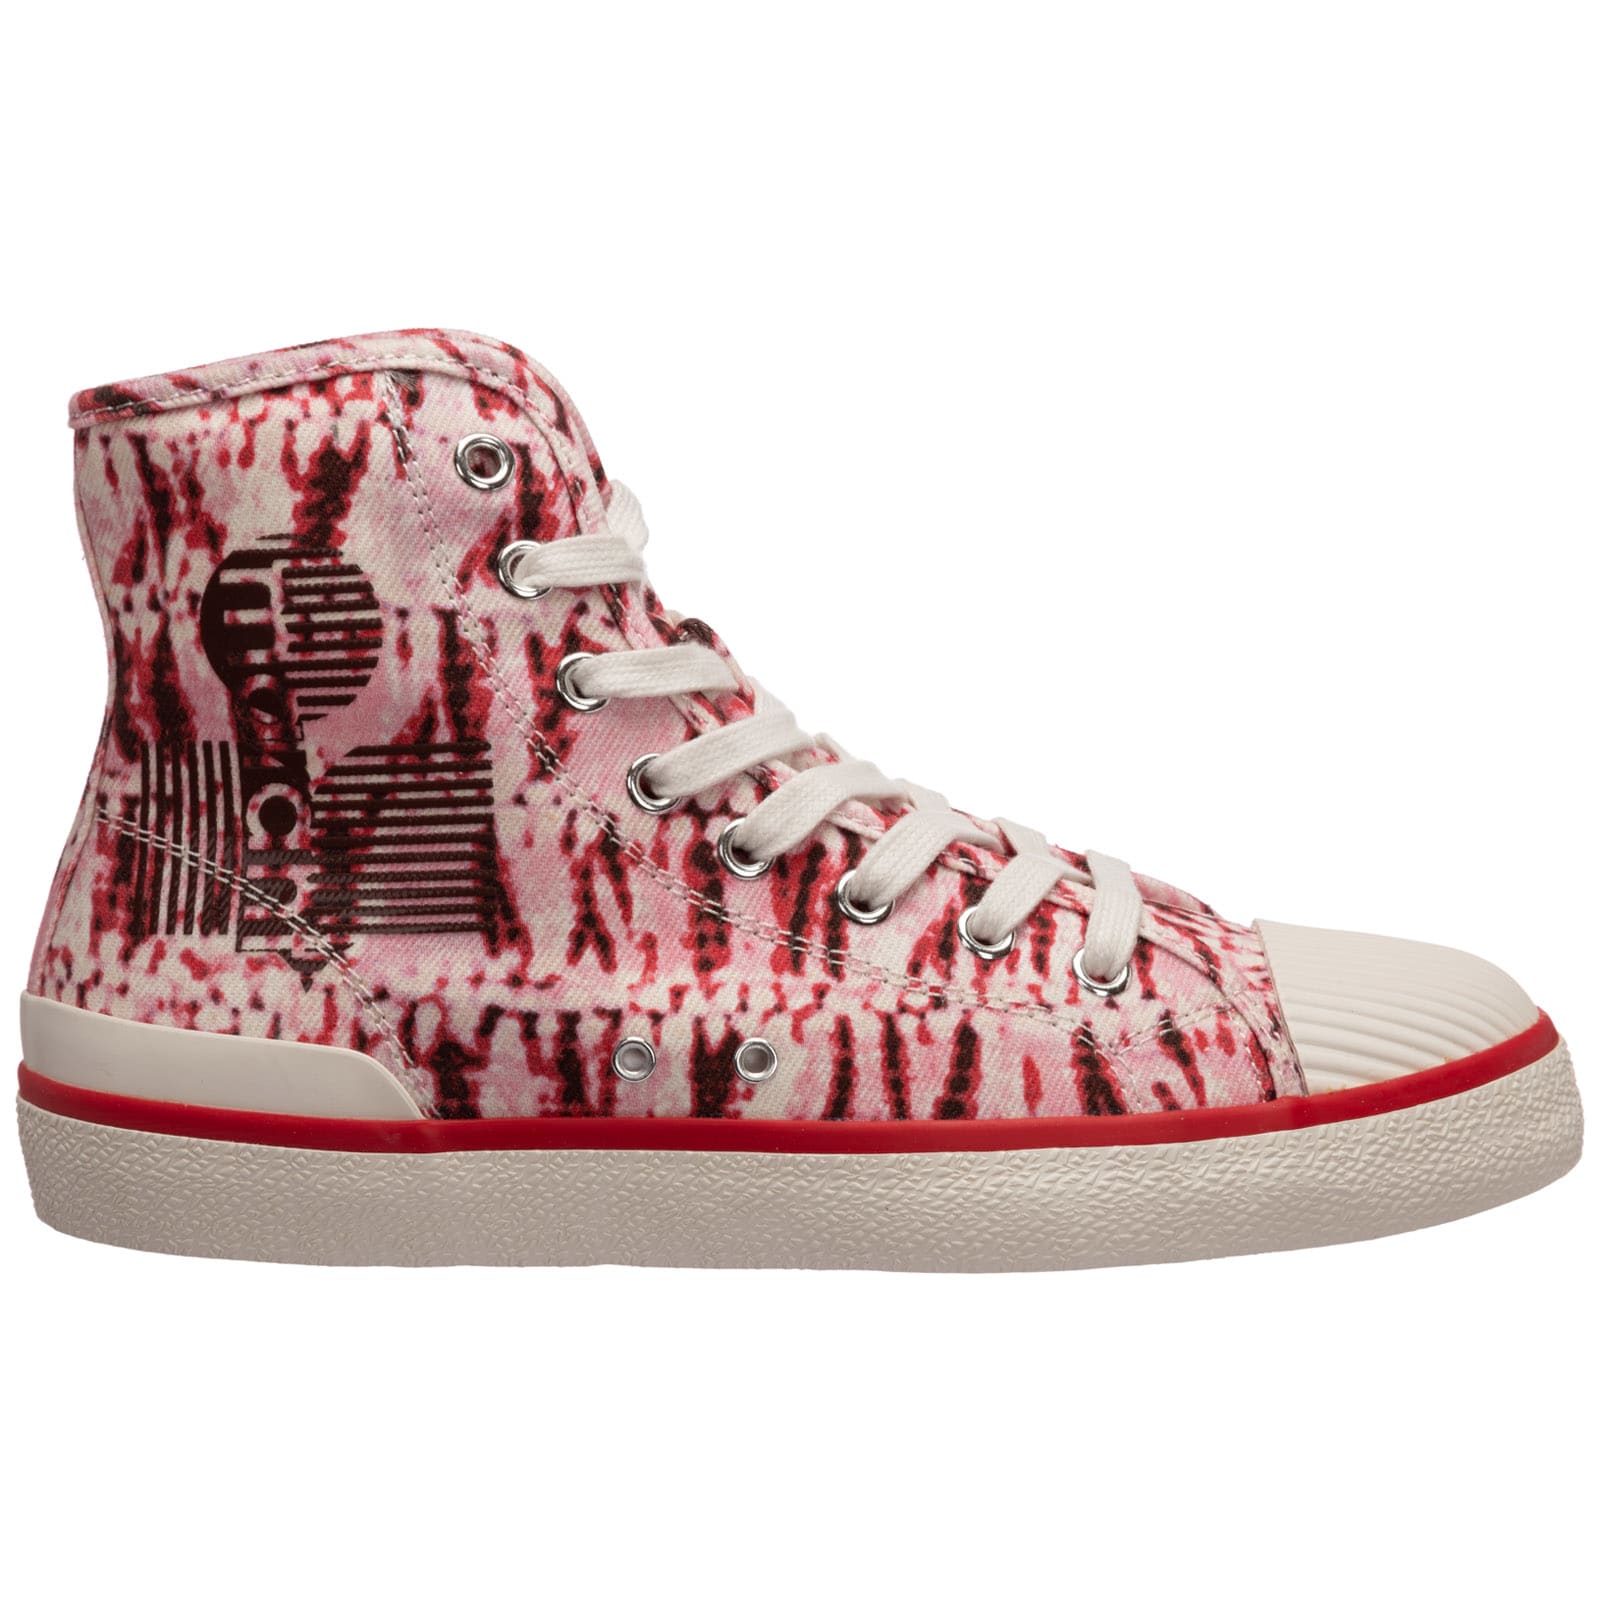 Buy Isabel Marant Teddy High-top Sneakers online, shop Isabel Marant shoes with free shipping